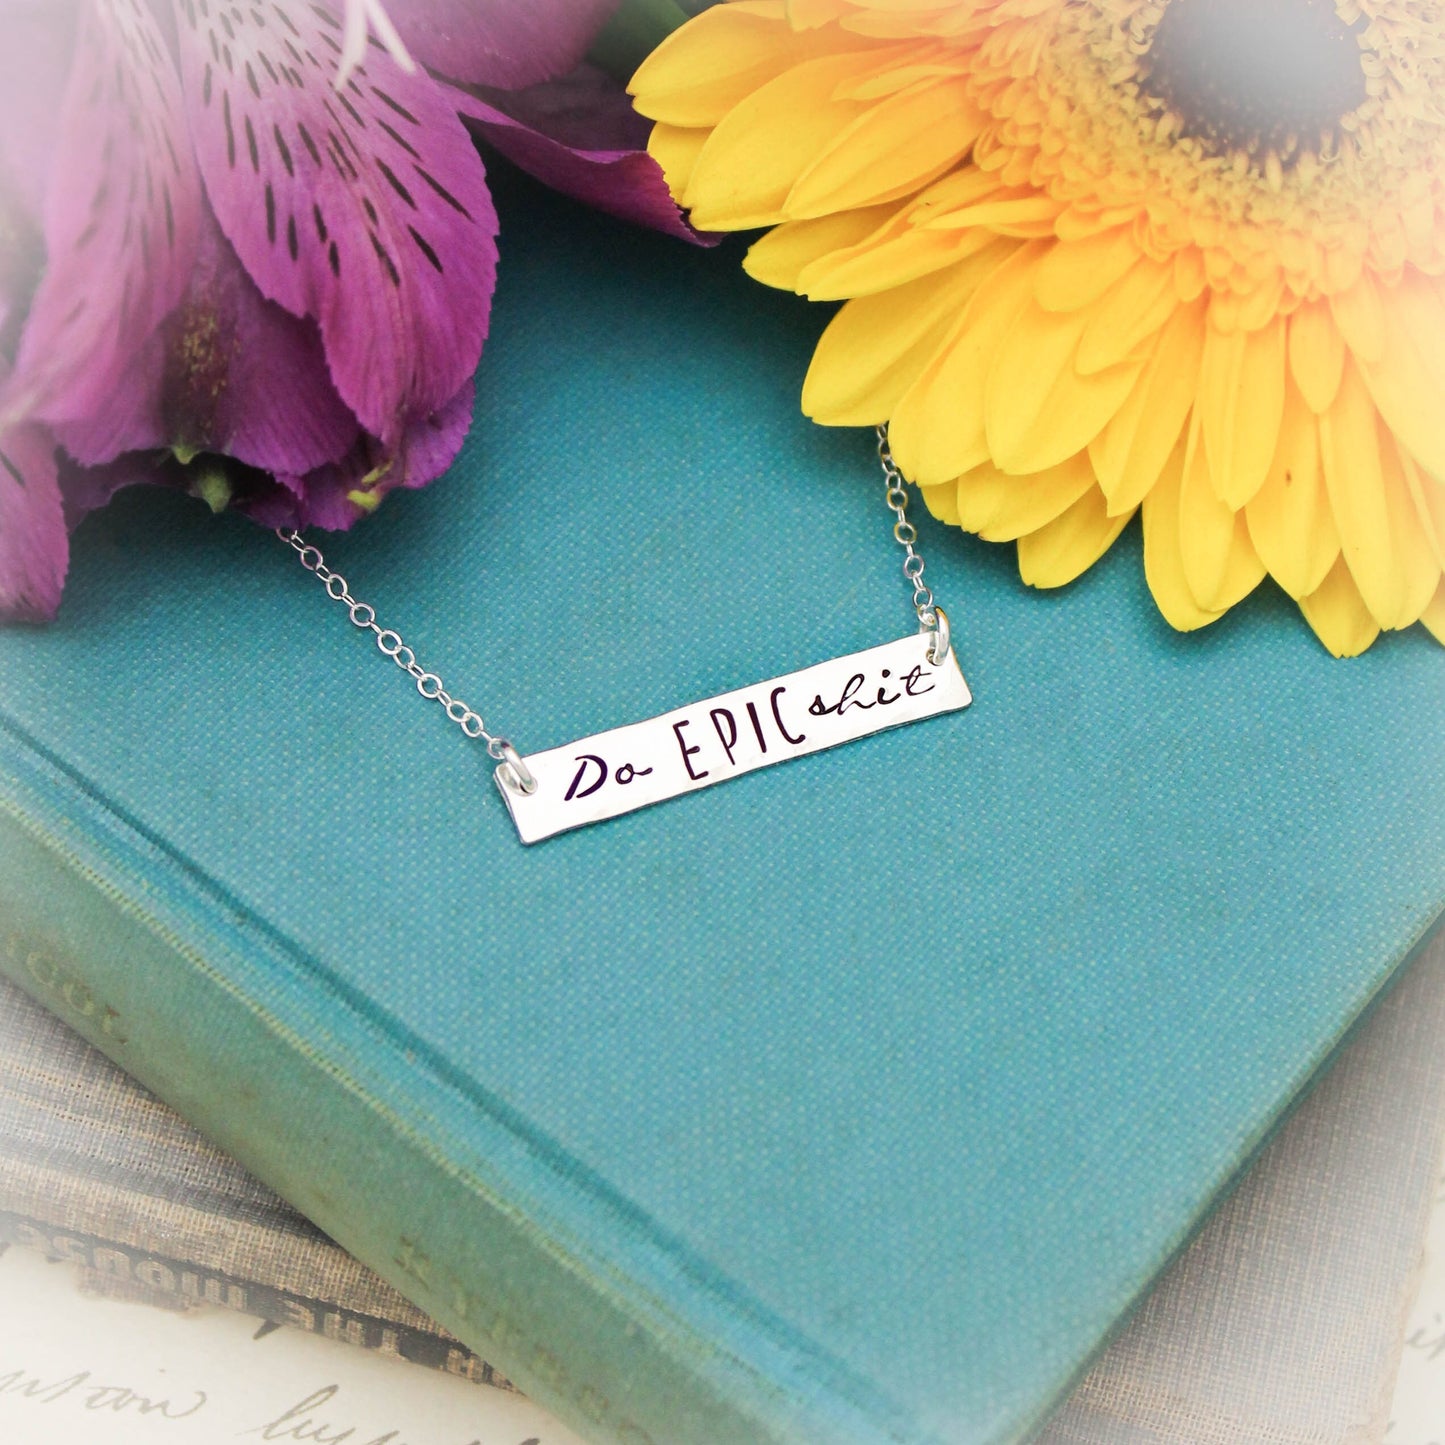 Sterling Silver Bar Necklace, DO EPIC SHIT Necklace, Personalized Bar Necklace, Silver Bar Necklace, Grad Necklace, Hand Stamped Jewelry